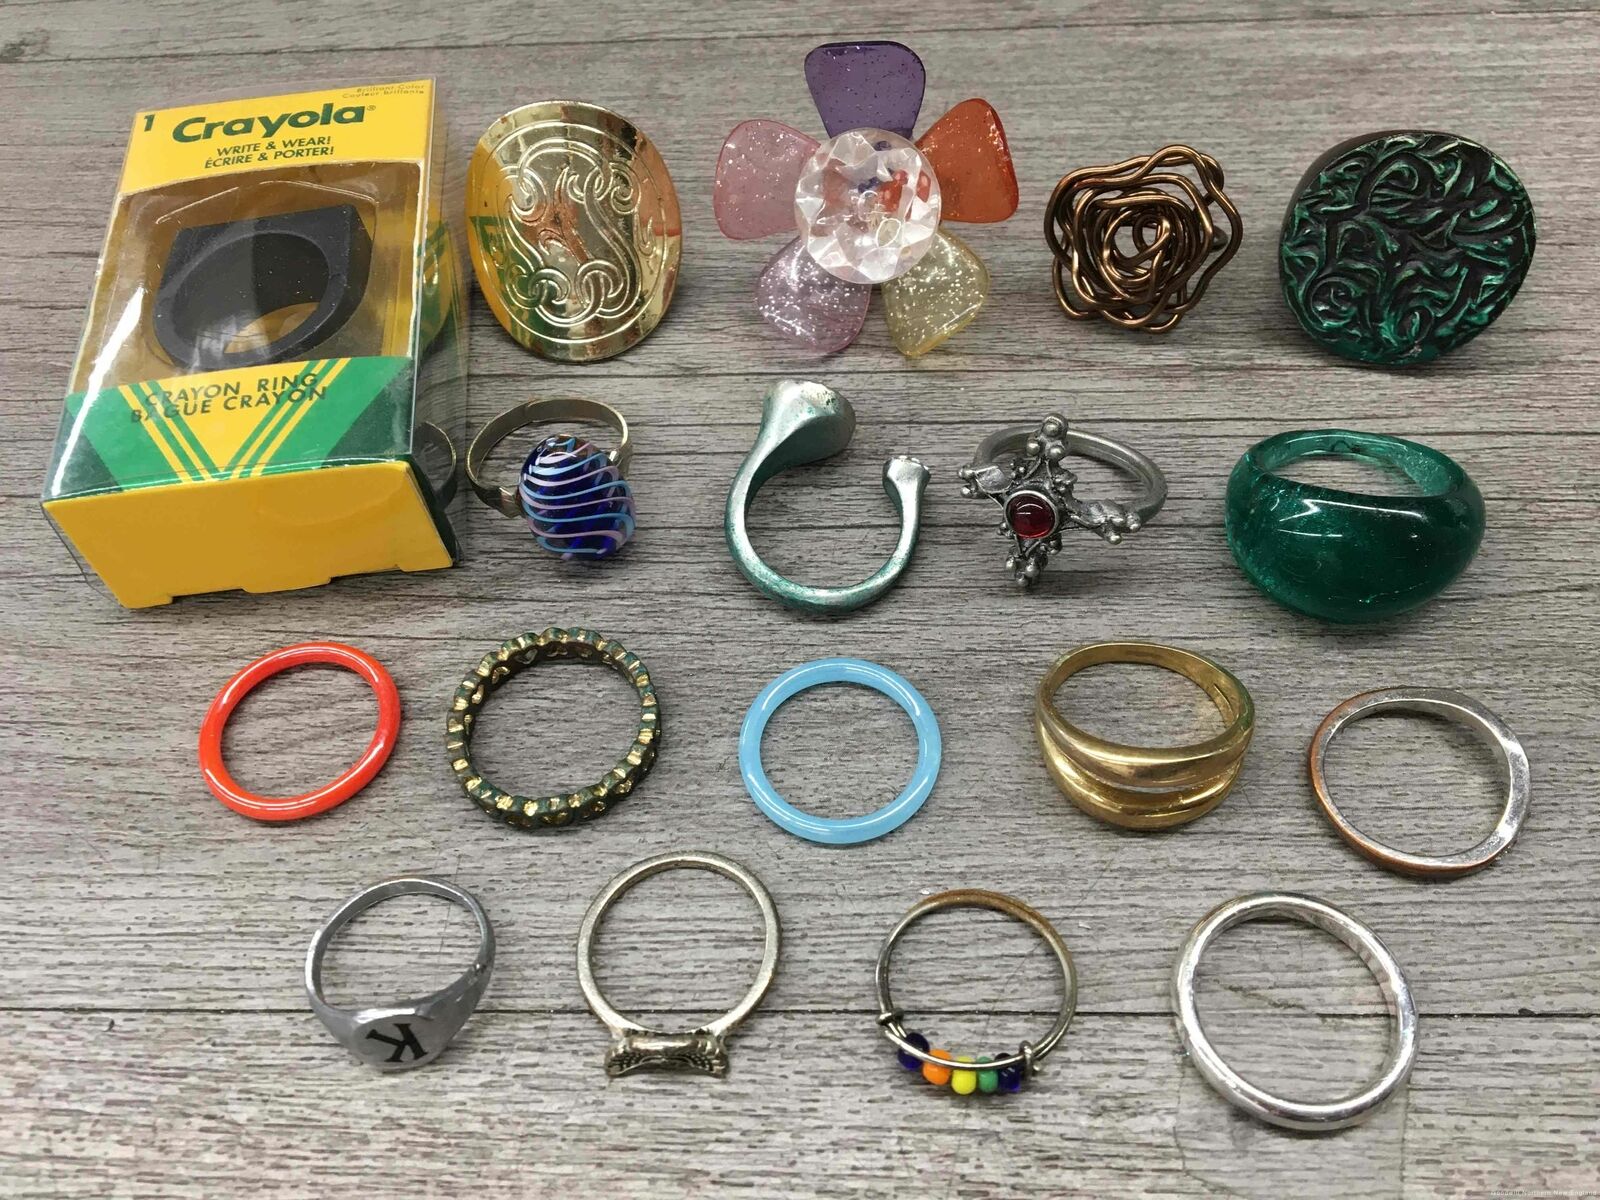 Costume Jewelry Rings Lot Crayola Sparkle Flower